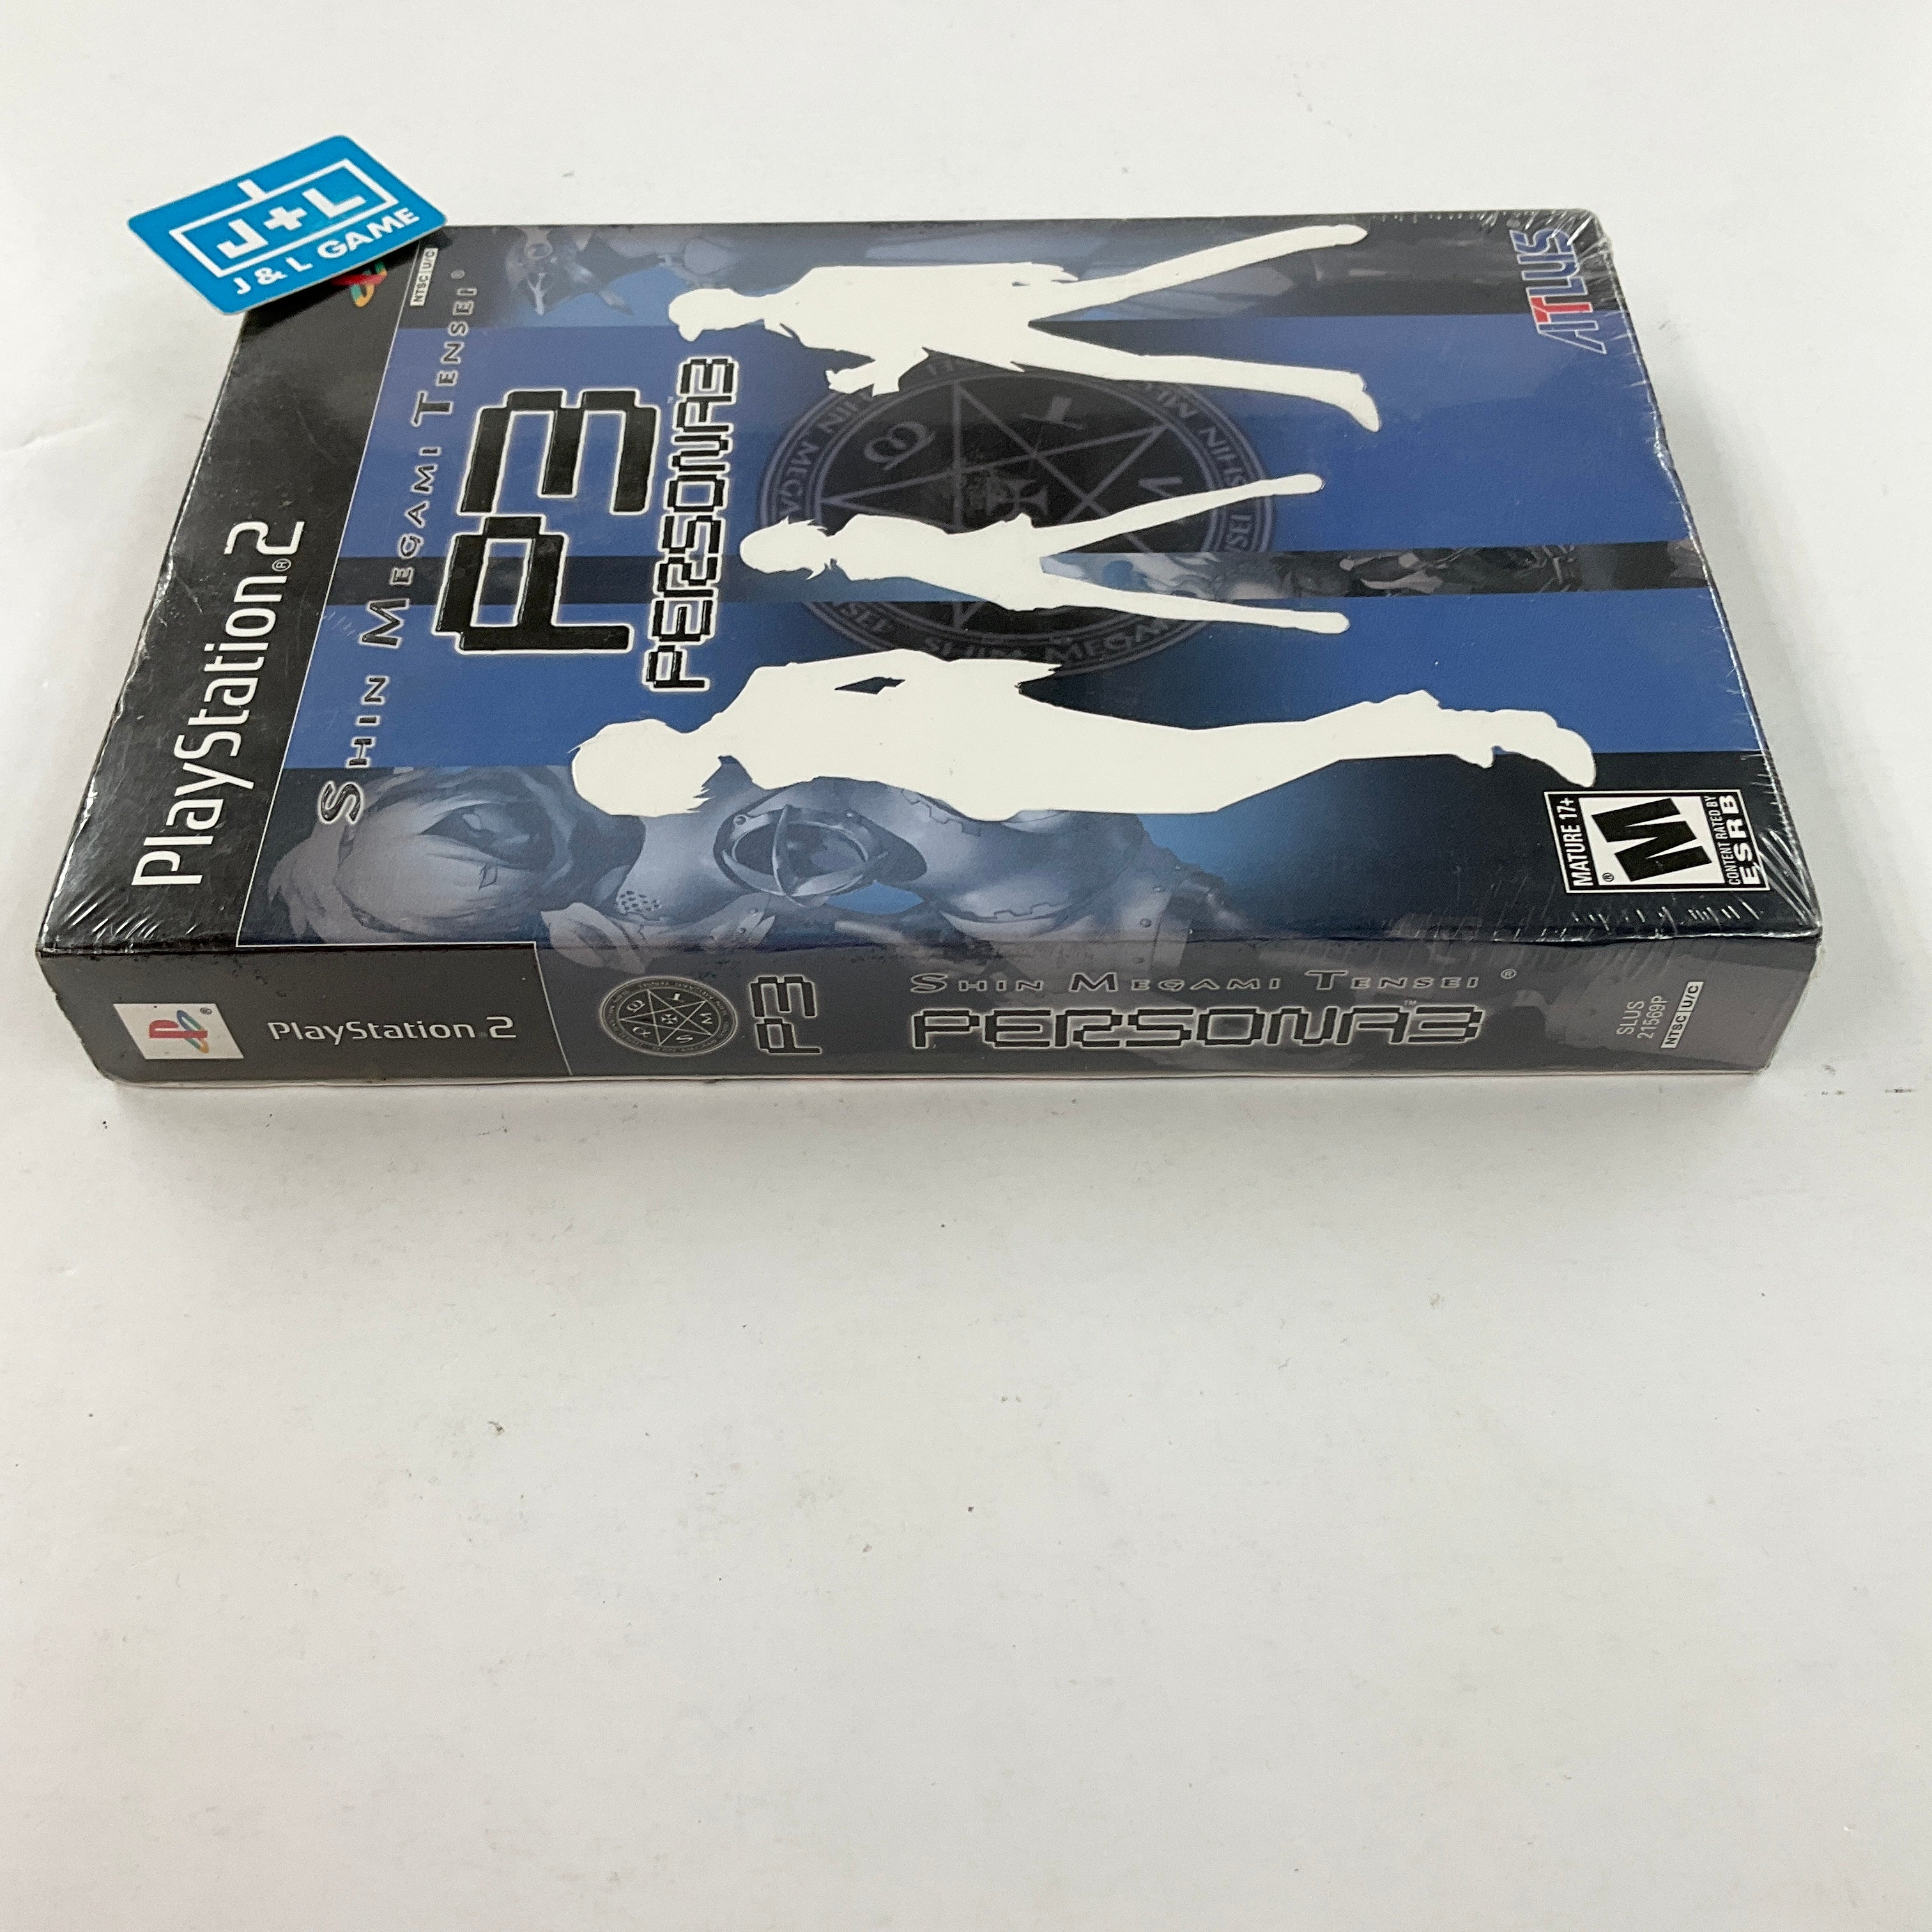 Persona 3 with Soundtrack CD and Artbook (Limited Edition) - (PS2) PlayStation 2 Video Games Atlus   